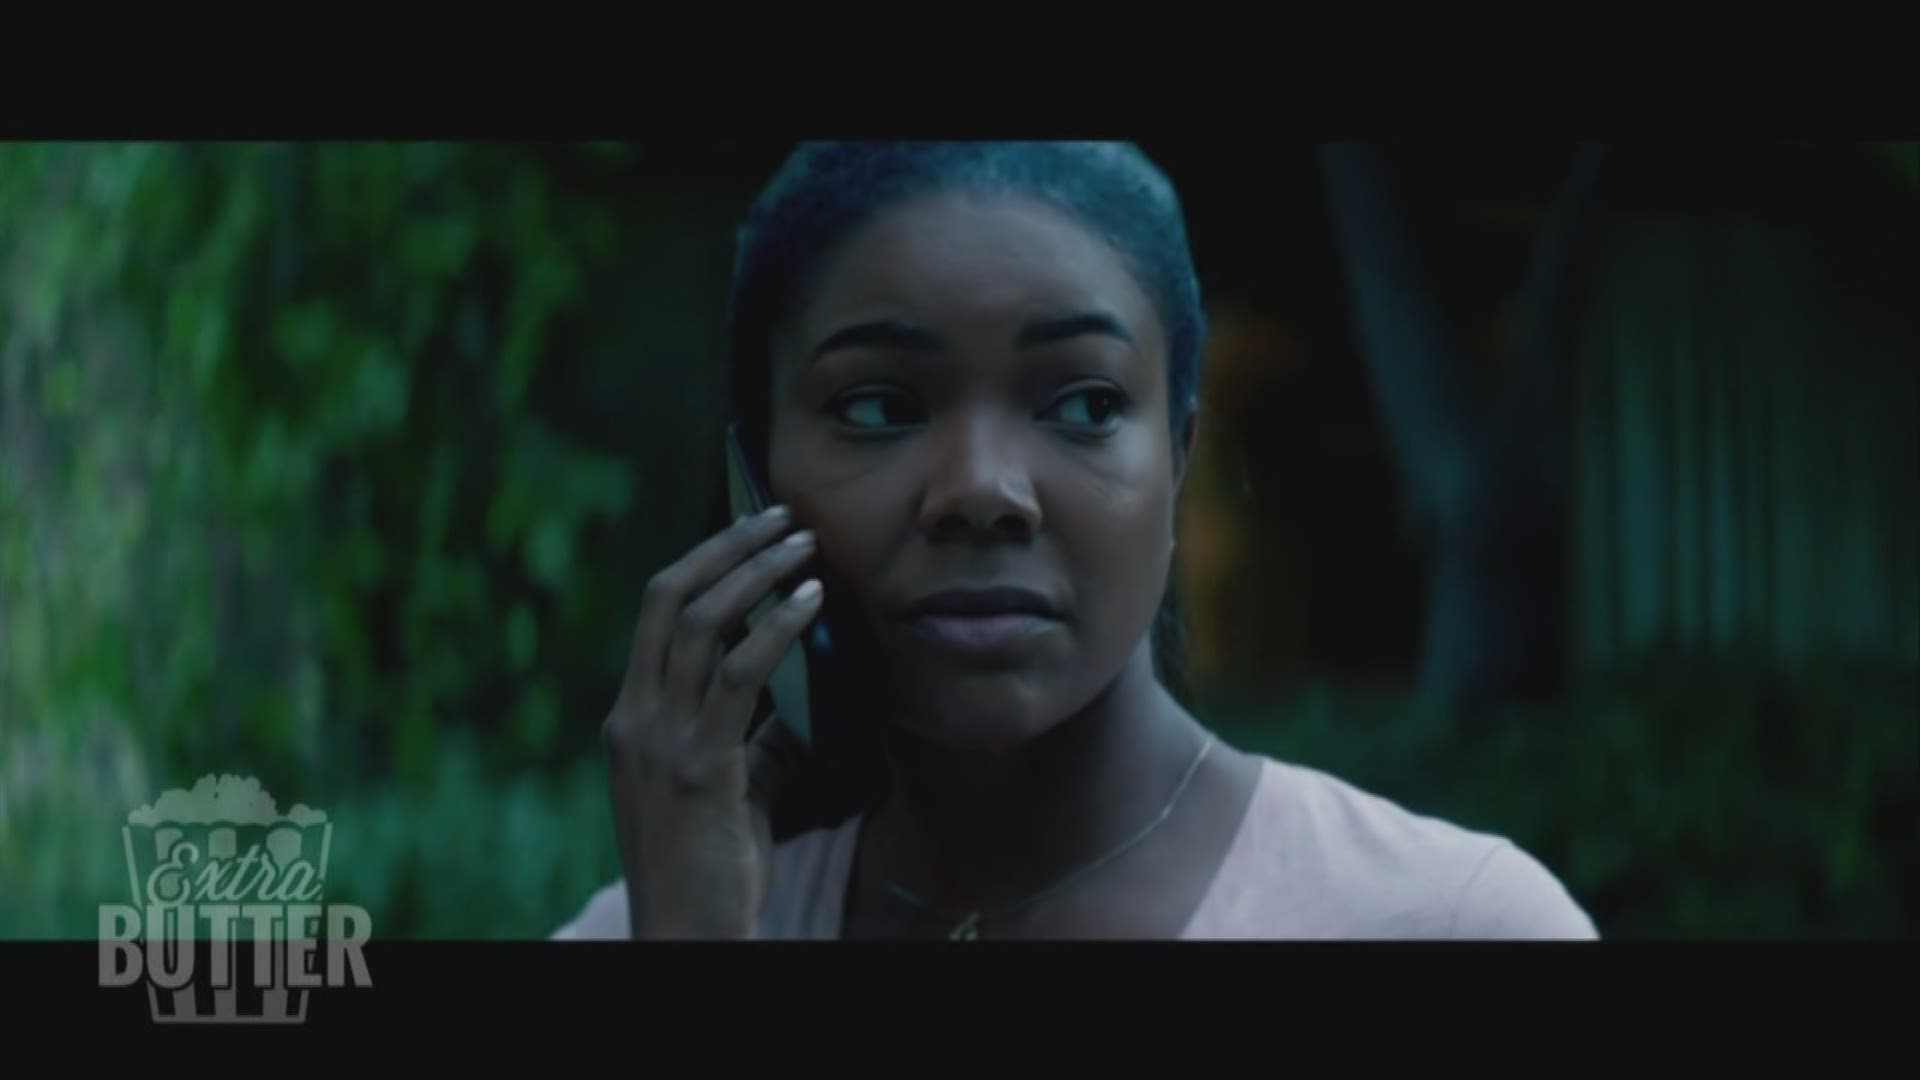 Gabrielle Union brings the 'Mama Bear' instincts to the big screen for 'Breaking In'.